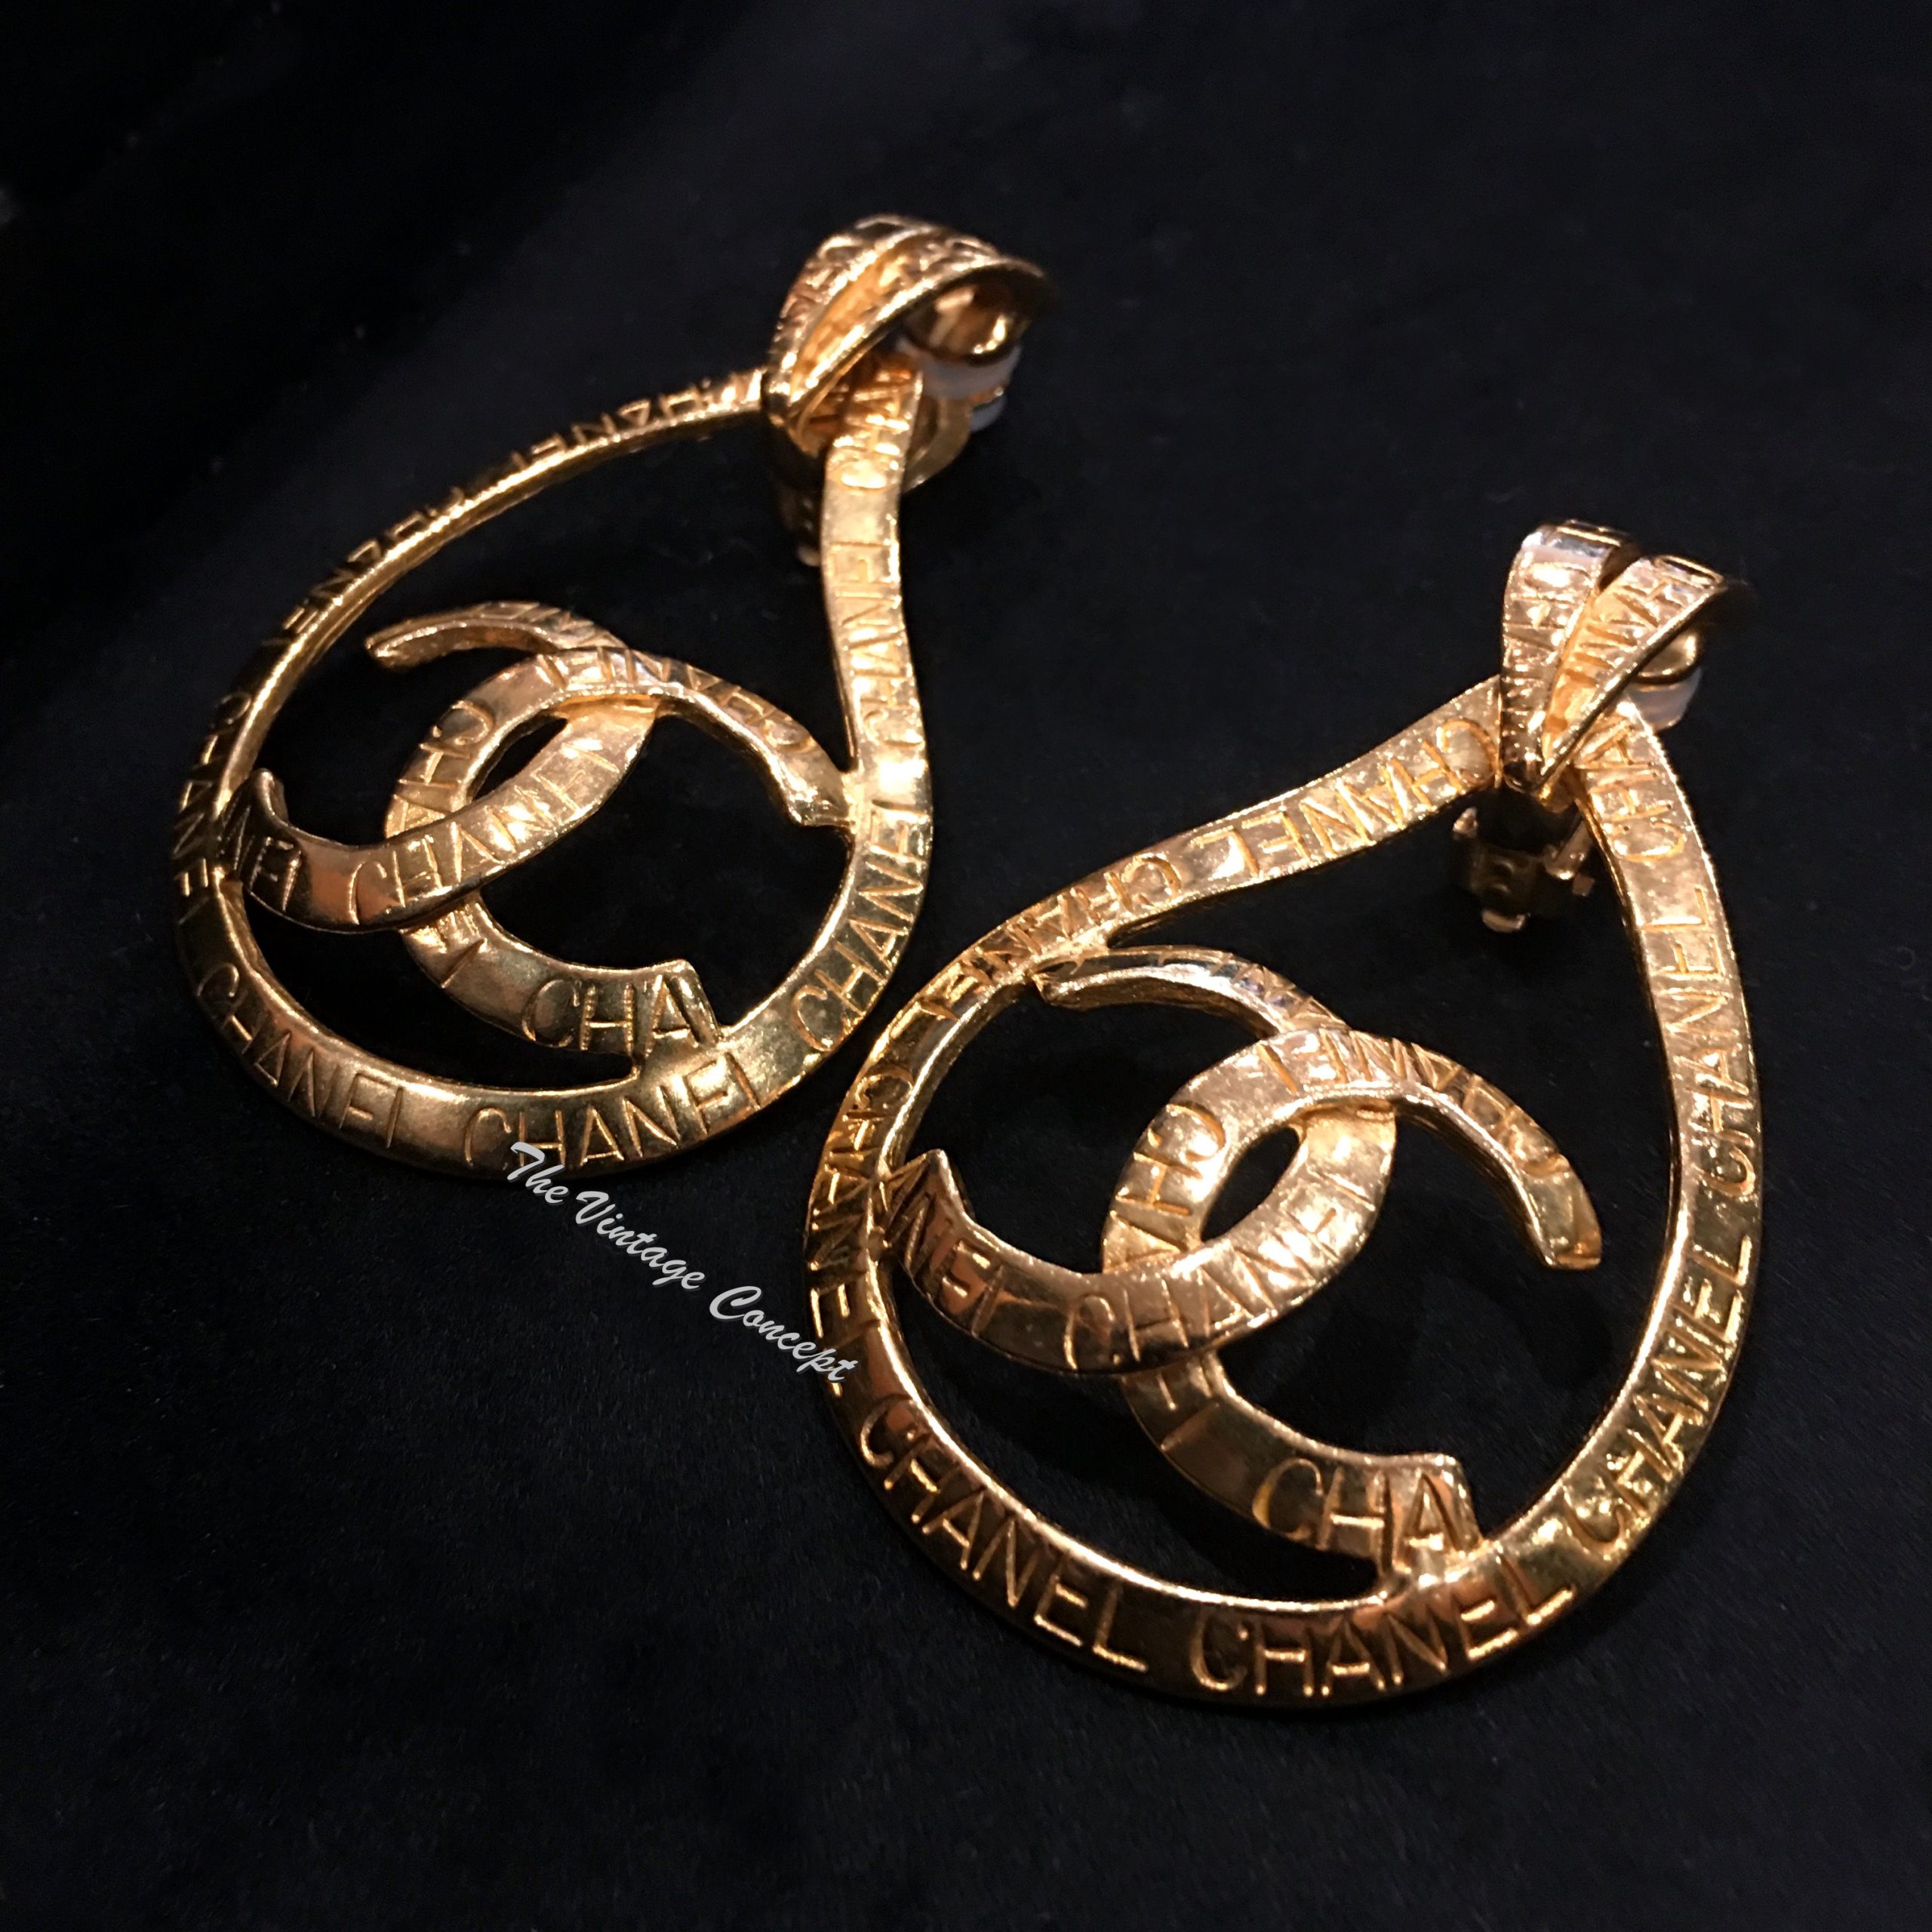 Chanel Gold Tone Teardrop Big Logo w/ Engraving Clip Earrings 96P (SOLD) The Vintage Concept